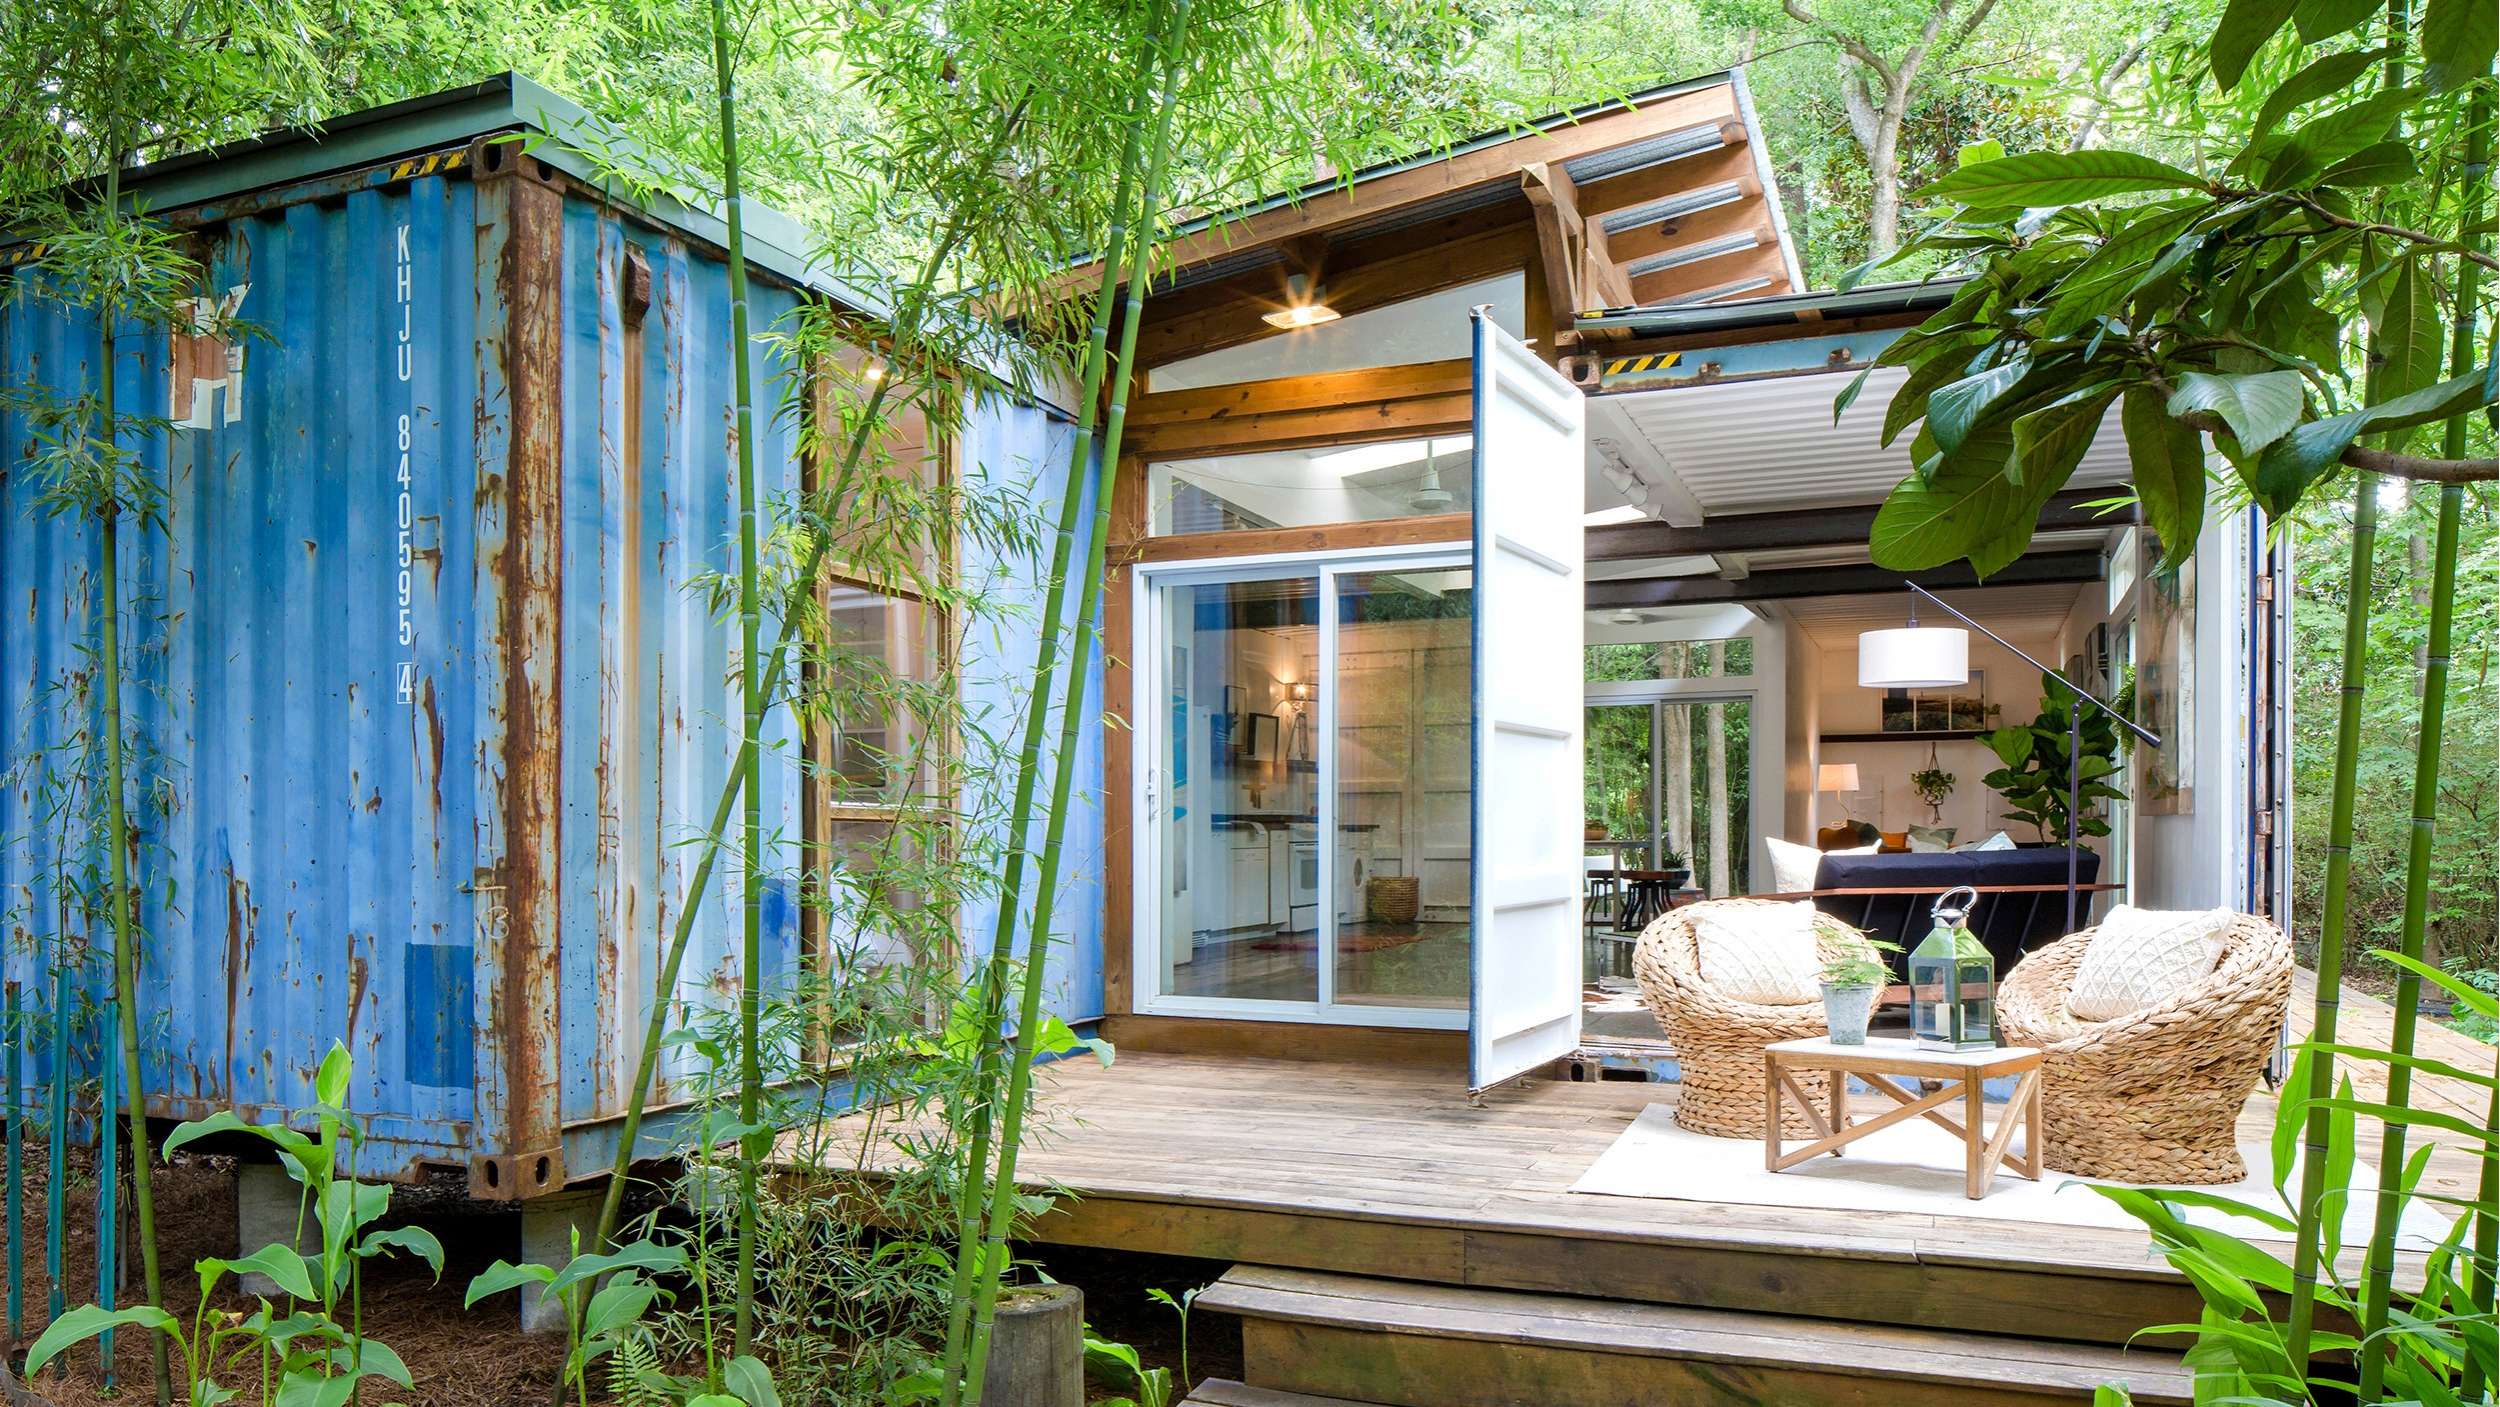 Create a Shipping Container Tiny House in 8 Easy Steps